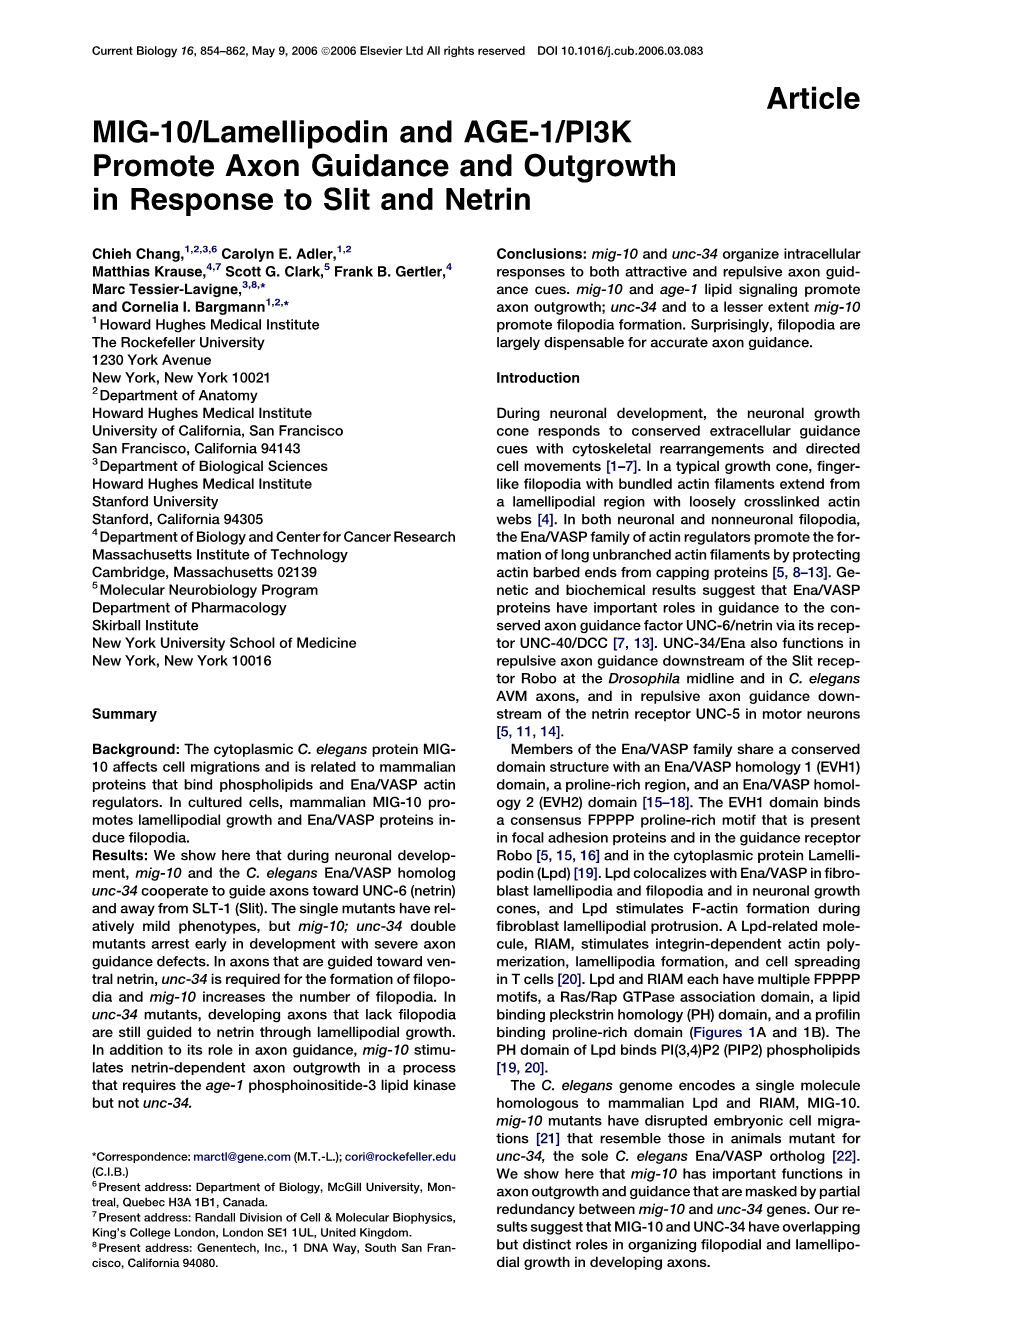 Article MIG-10/Lamellipodin and AGE-1/PI3K Promote Axon Guidance and Outgrowth in Response to Slit and Netrin